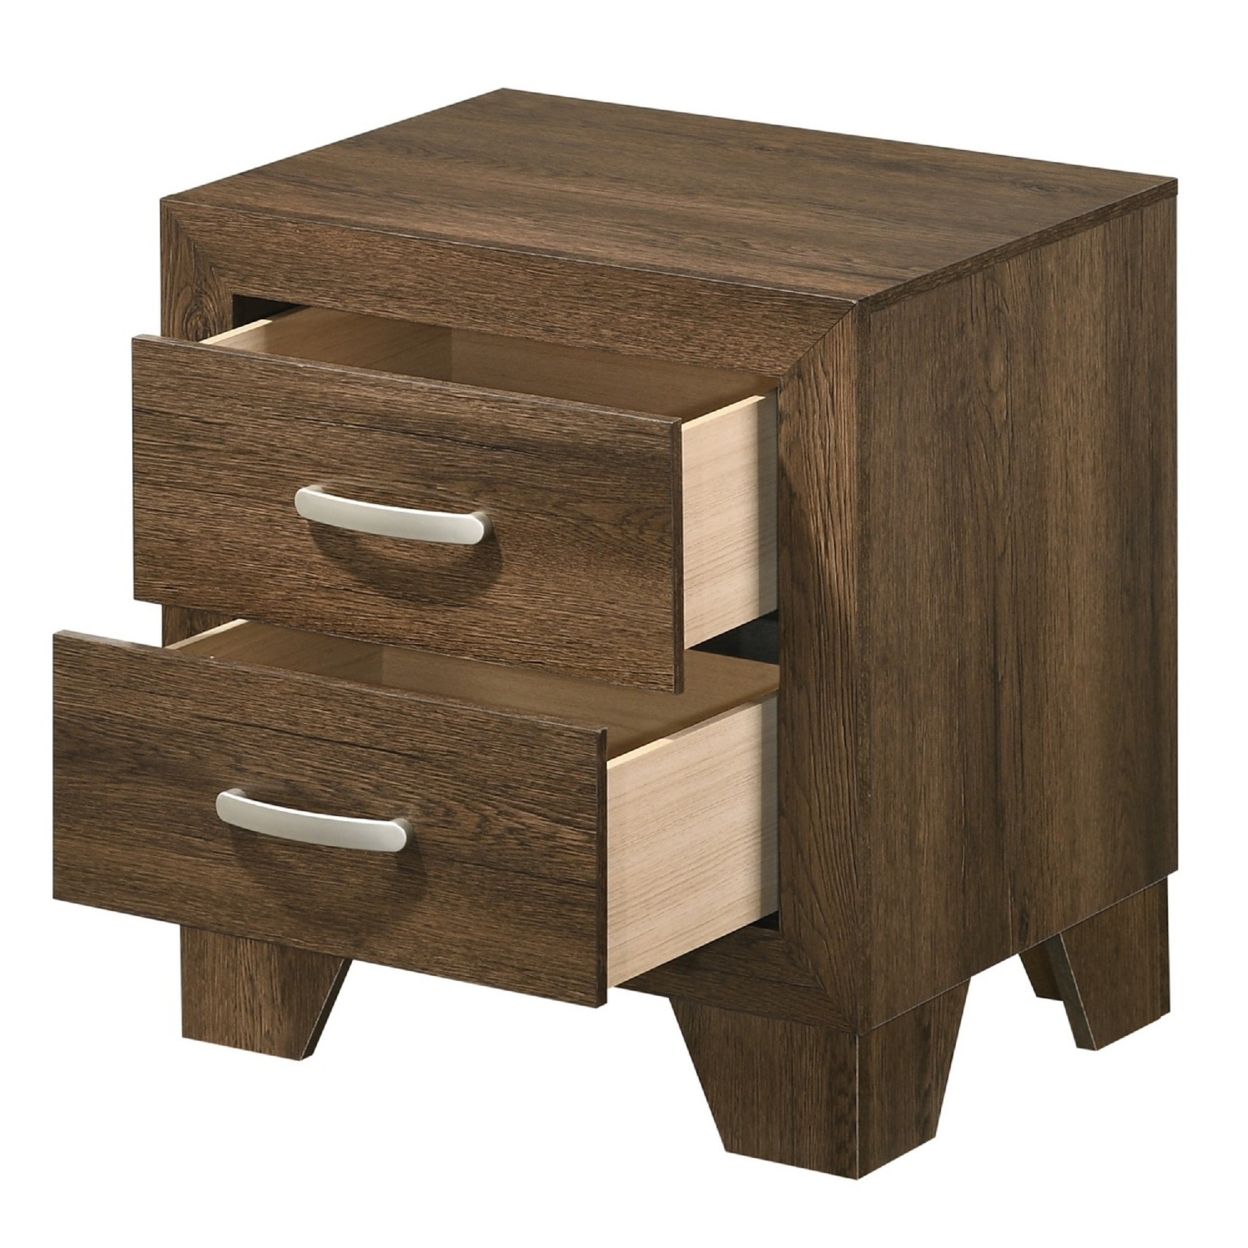 Transitional Style Wooden Nightstand With 2 Drawers And Metal Handles,Brown- Saltoro Sherpi